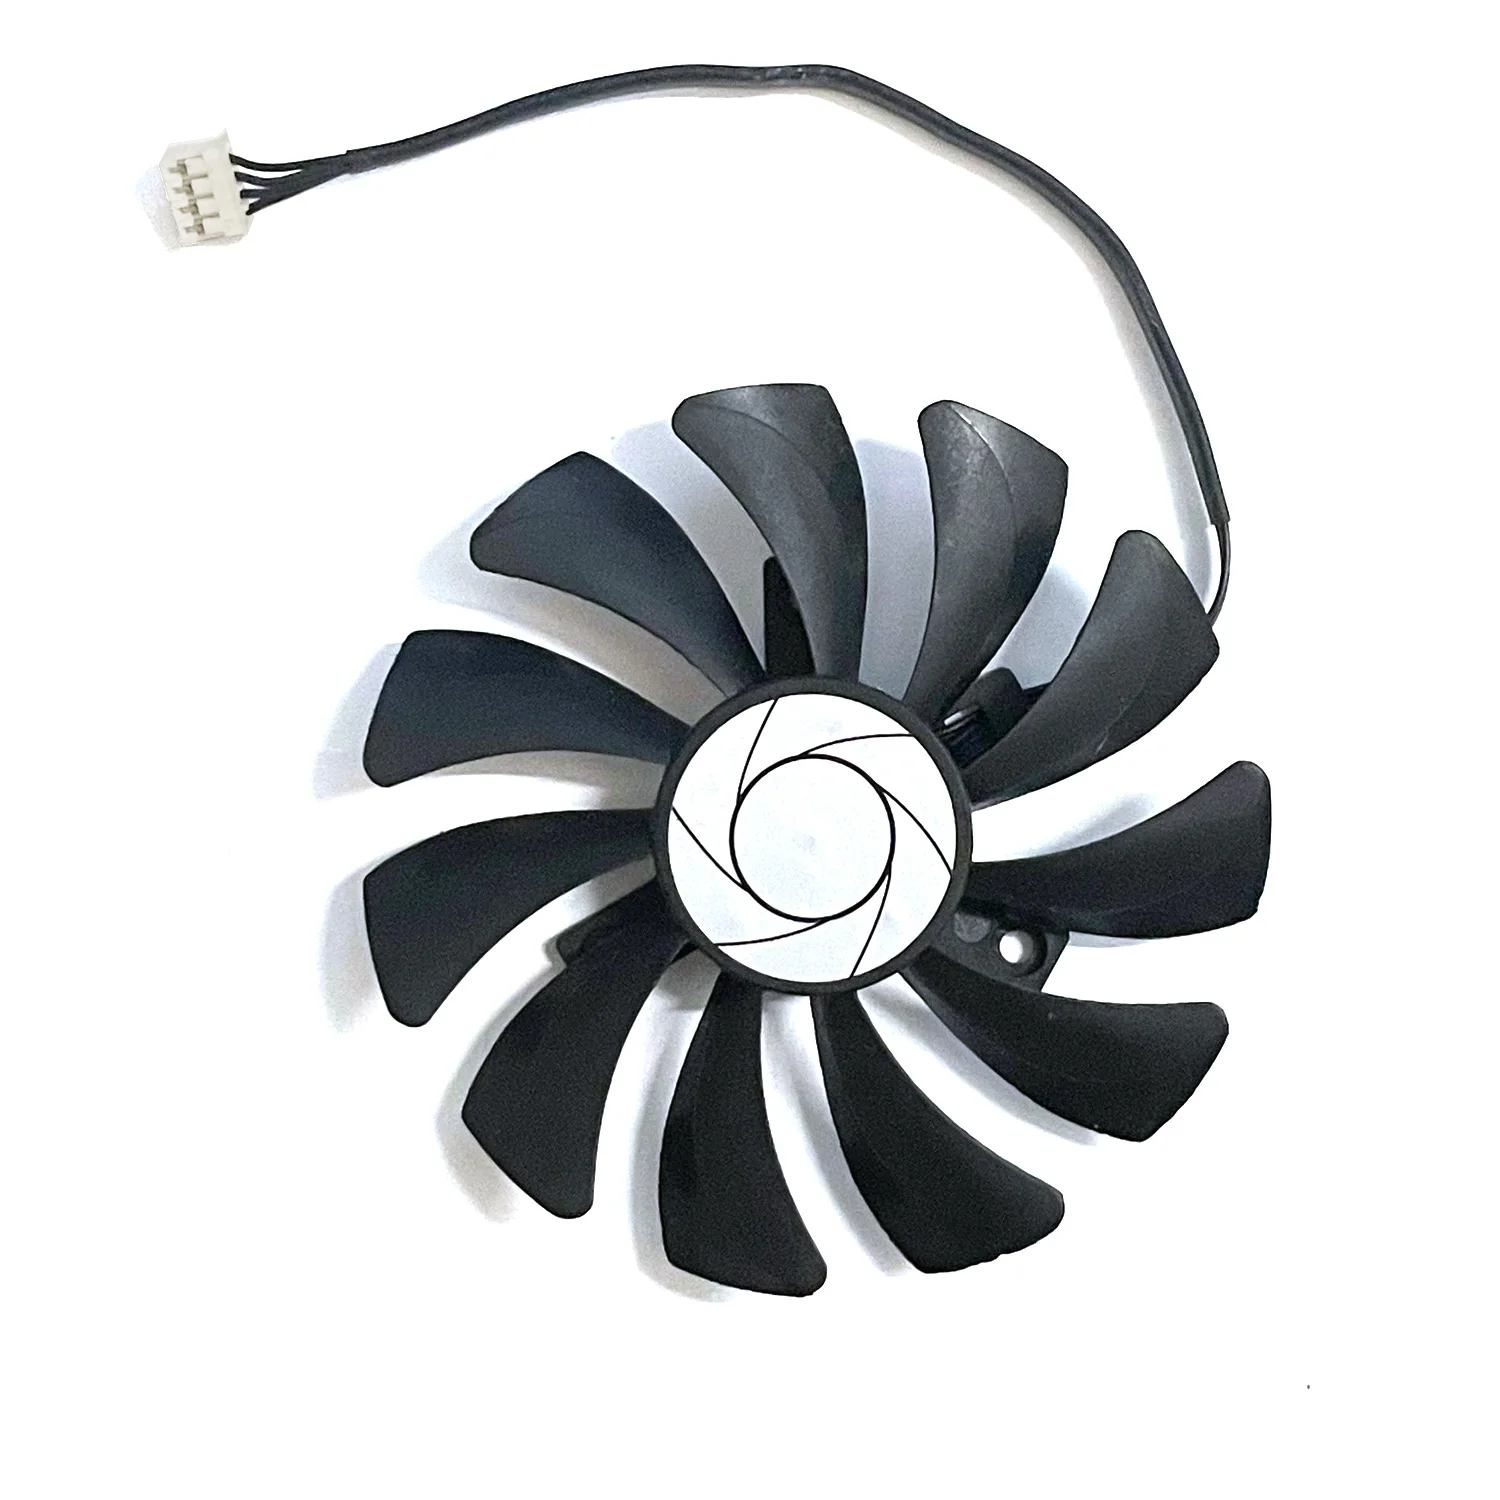 HA9010H12SF-Z 85mm 4pin RX460 4GB Cooler Fan Replacement for MSI Inno3D P106 960 GeForce GTX1060 AERO ITX 3G 6G OC Graphics Card